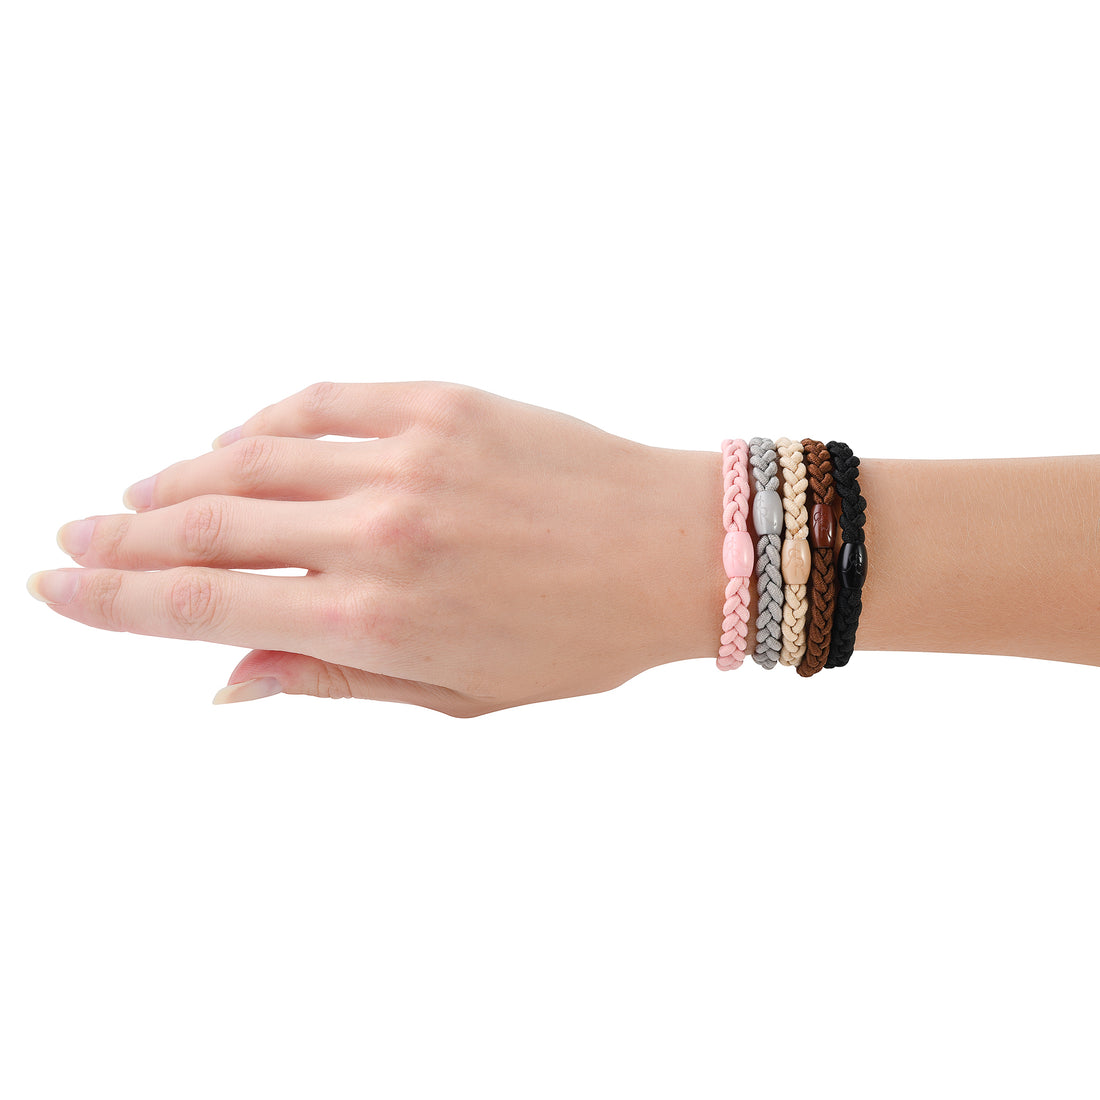 Hand modeling the Core Multi pack (5 cutie bands in  pink, blonde, grey, brown, black)